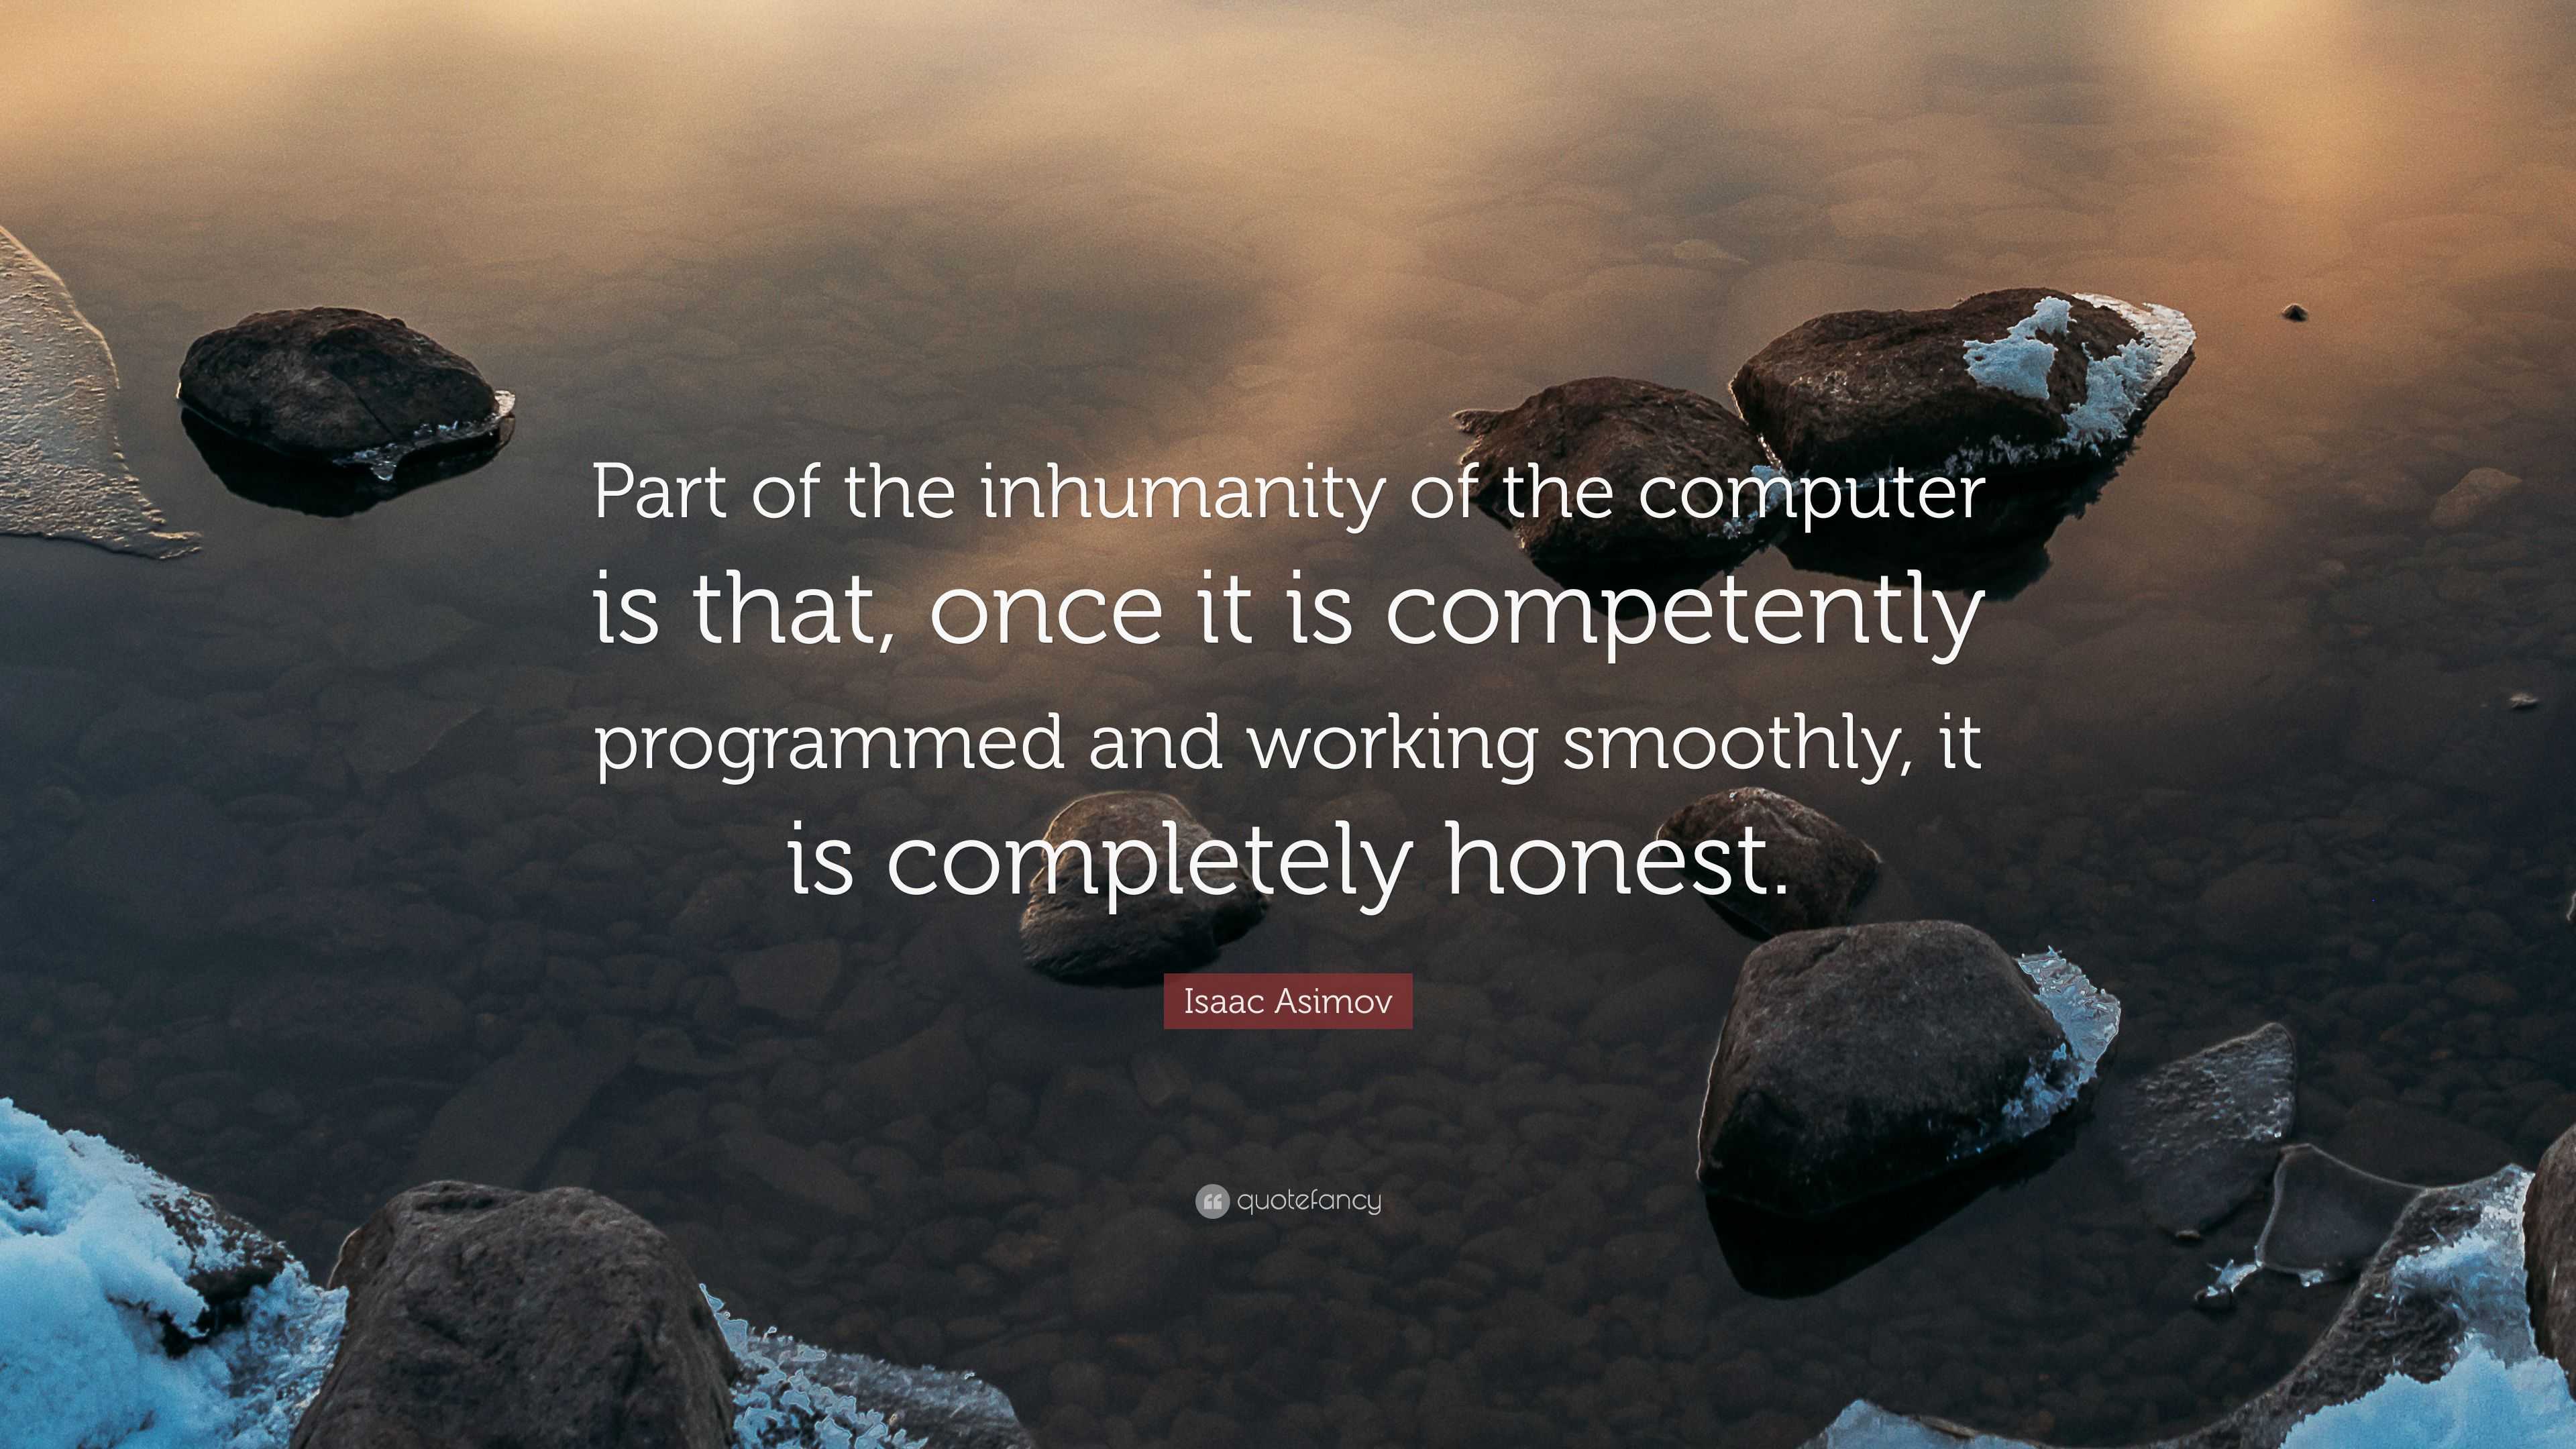 Isaac Asimov Quote “Part of the inhumanity of the computer is that